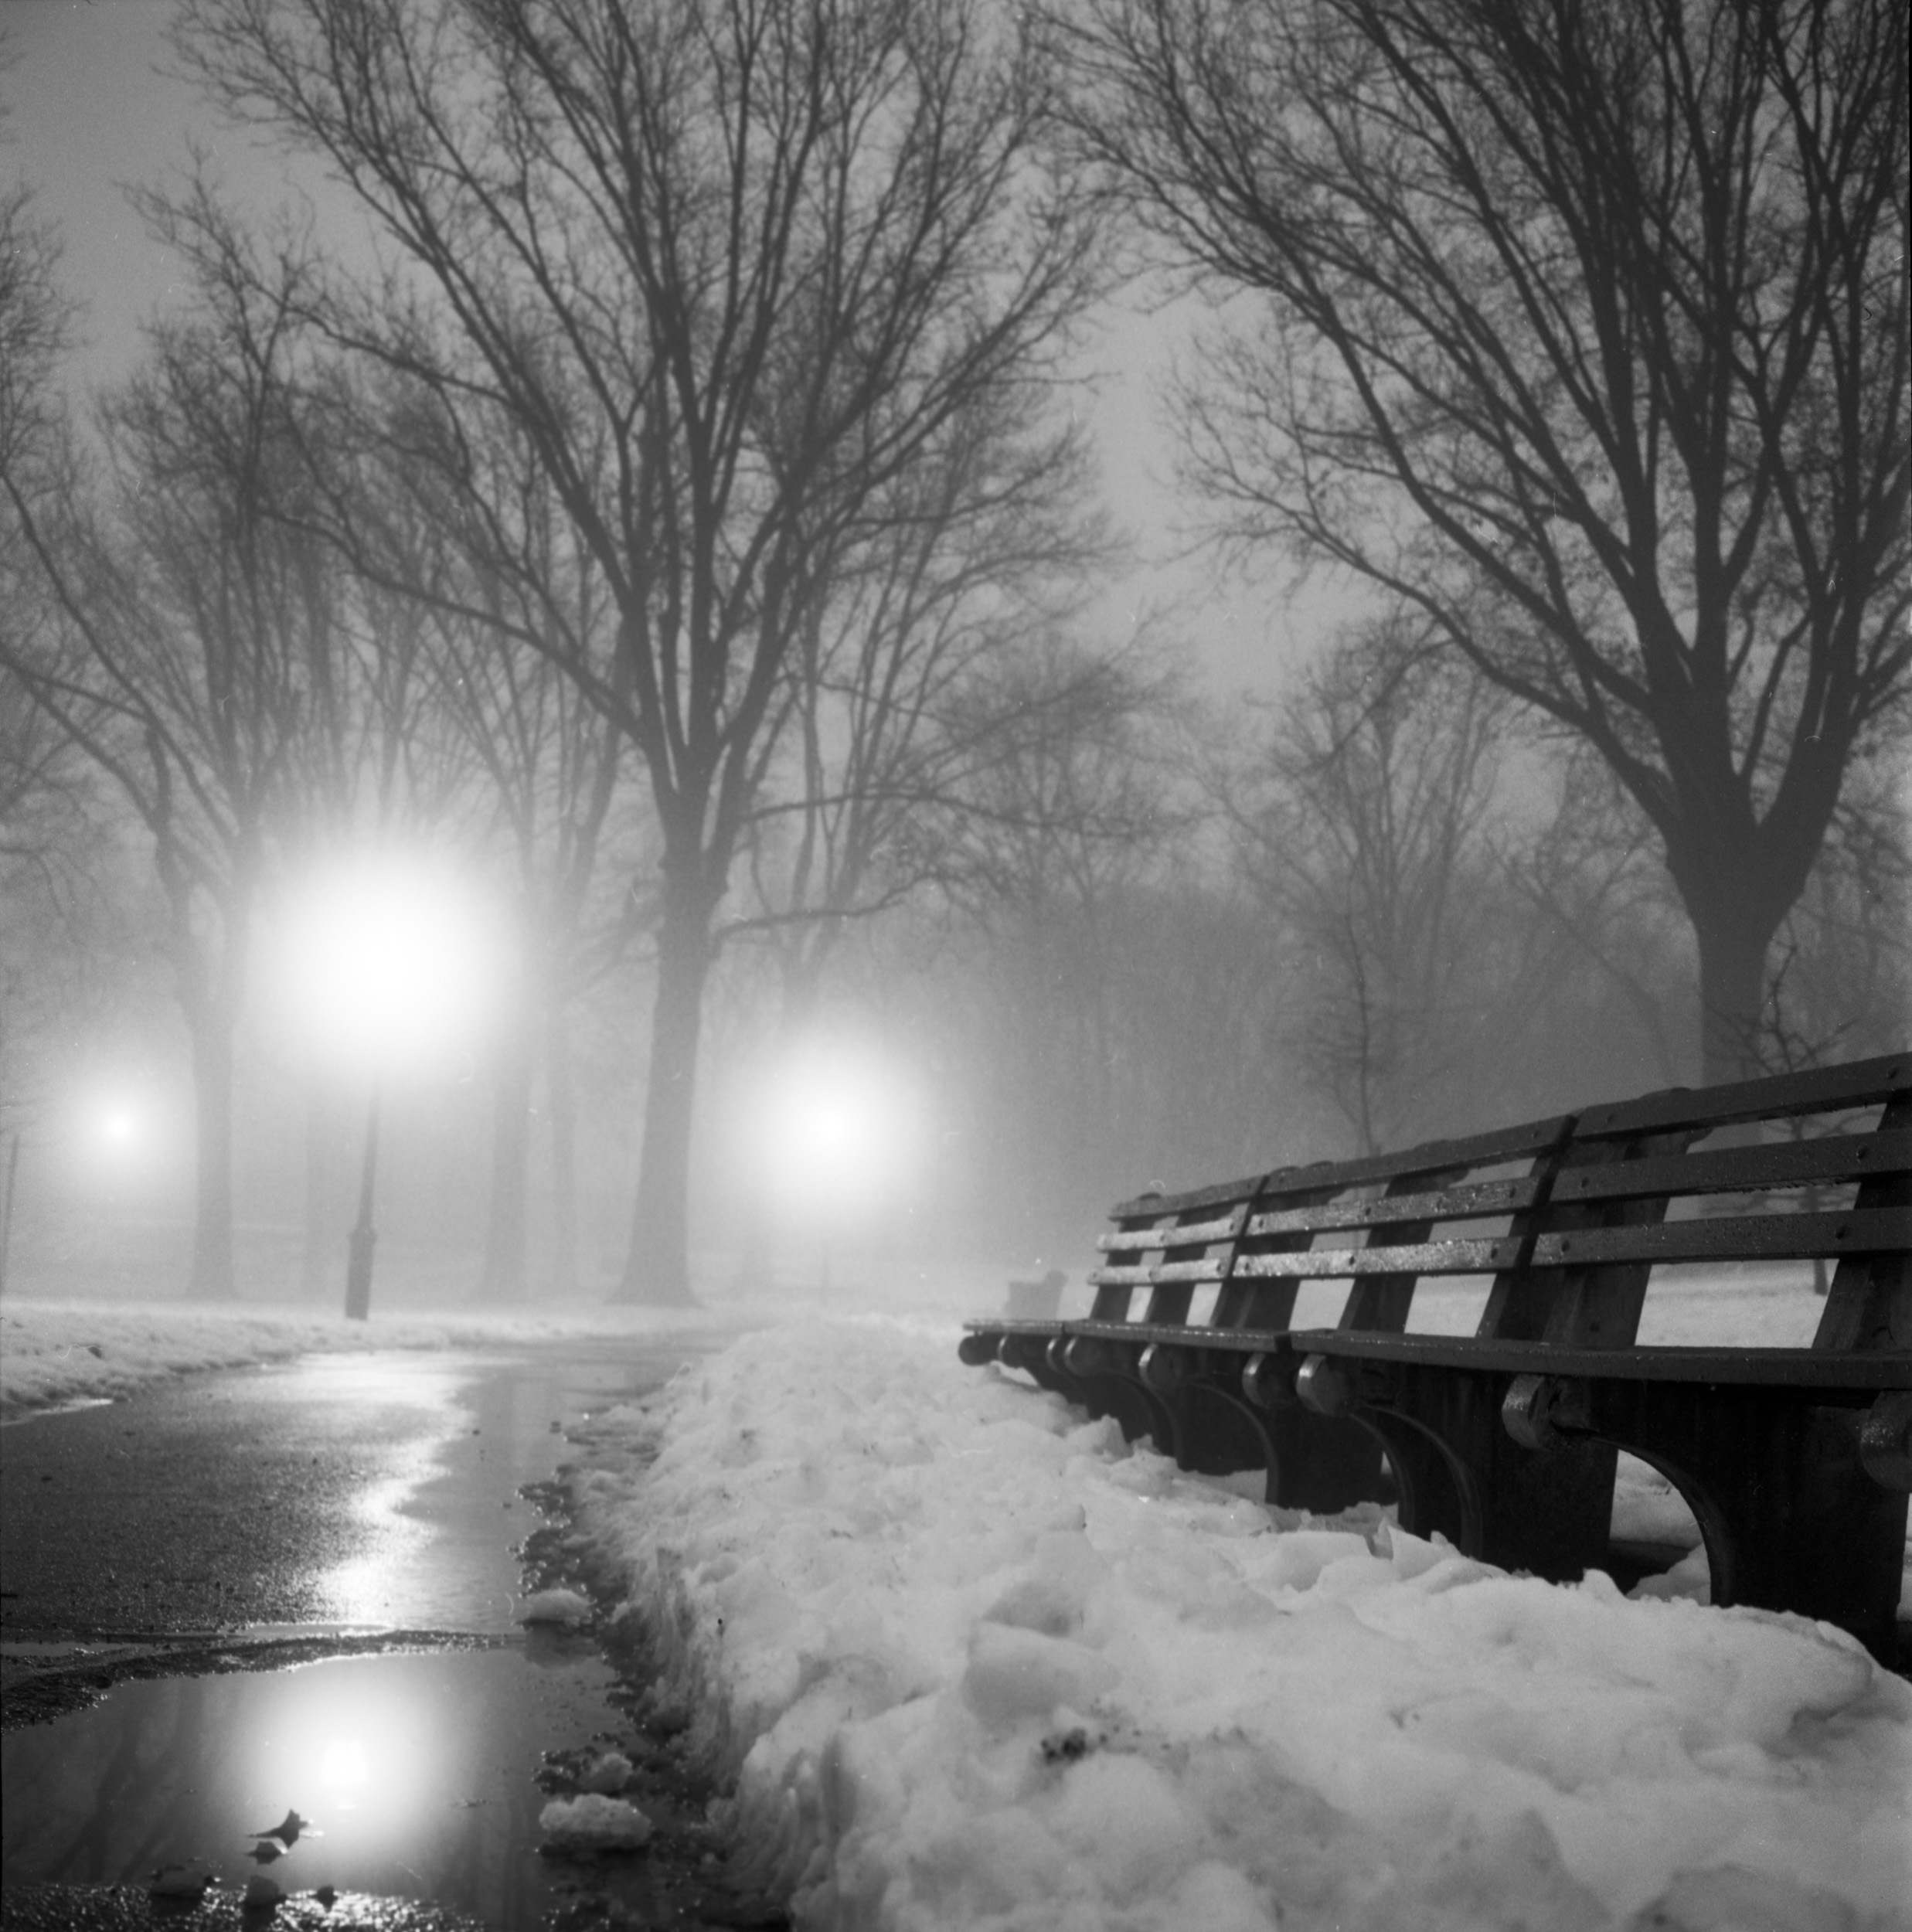 A-MEDIUM-FORMAT-FILM-LONG-EXPSOURE-OF-A-FOGGY-AND-SNOWY-NIGHT-IN-PROSPECT-PARK-BROOKLYN